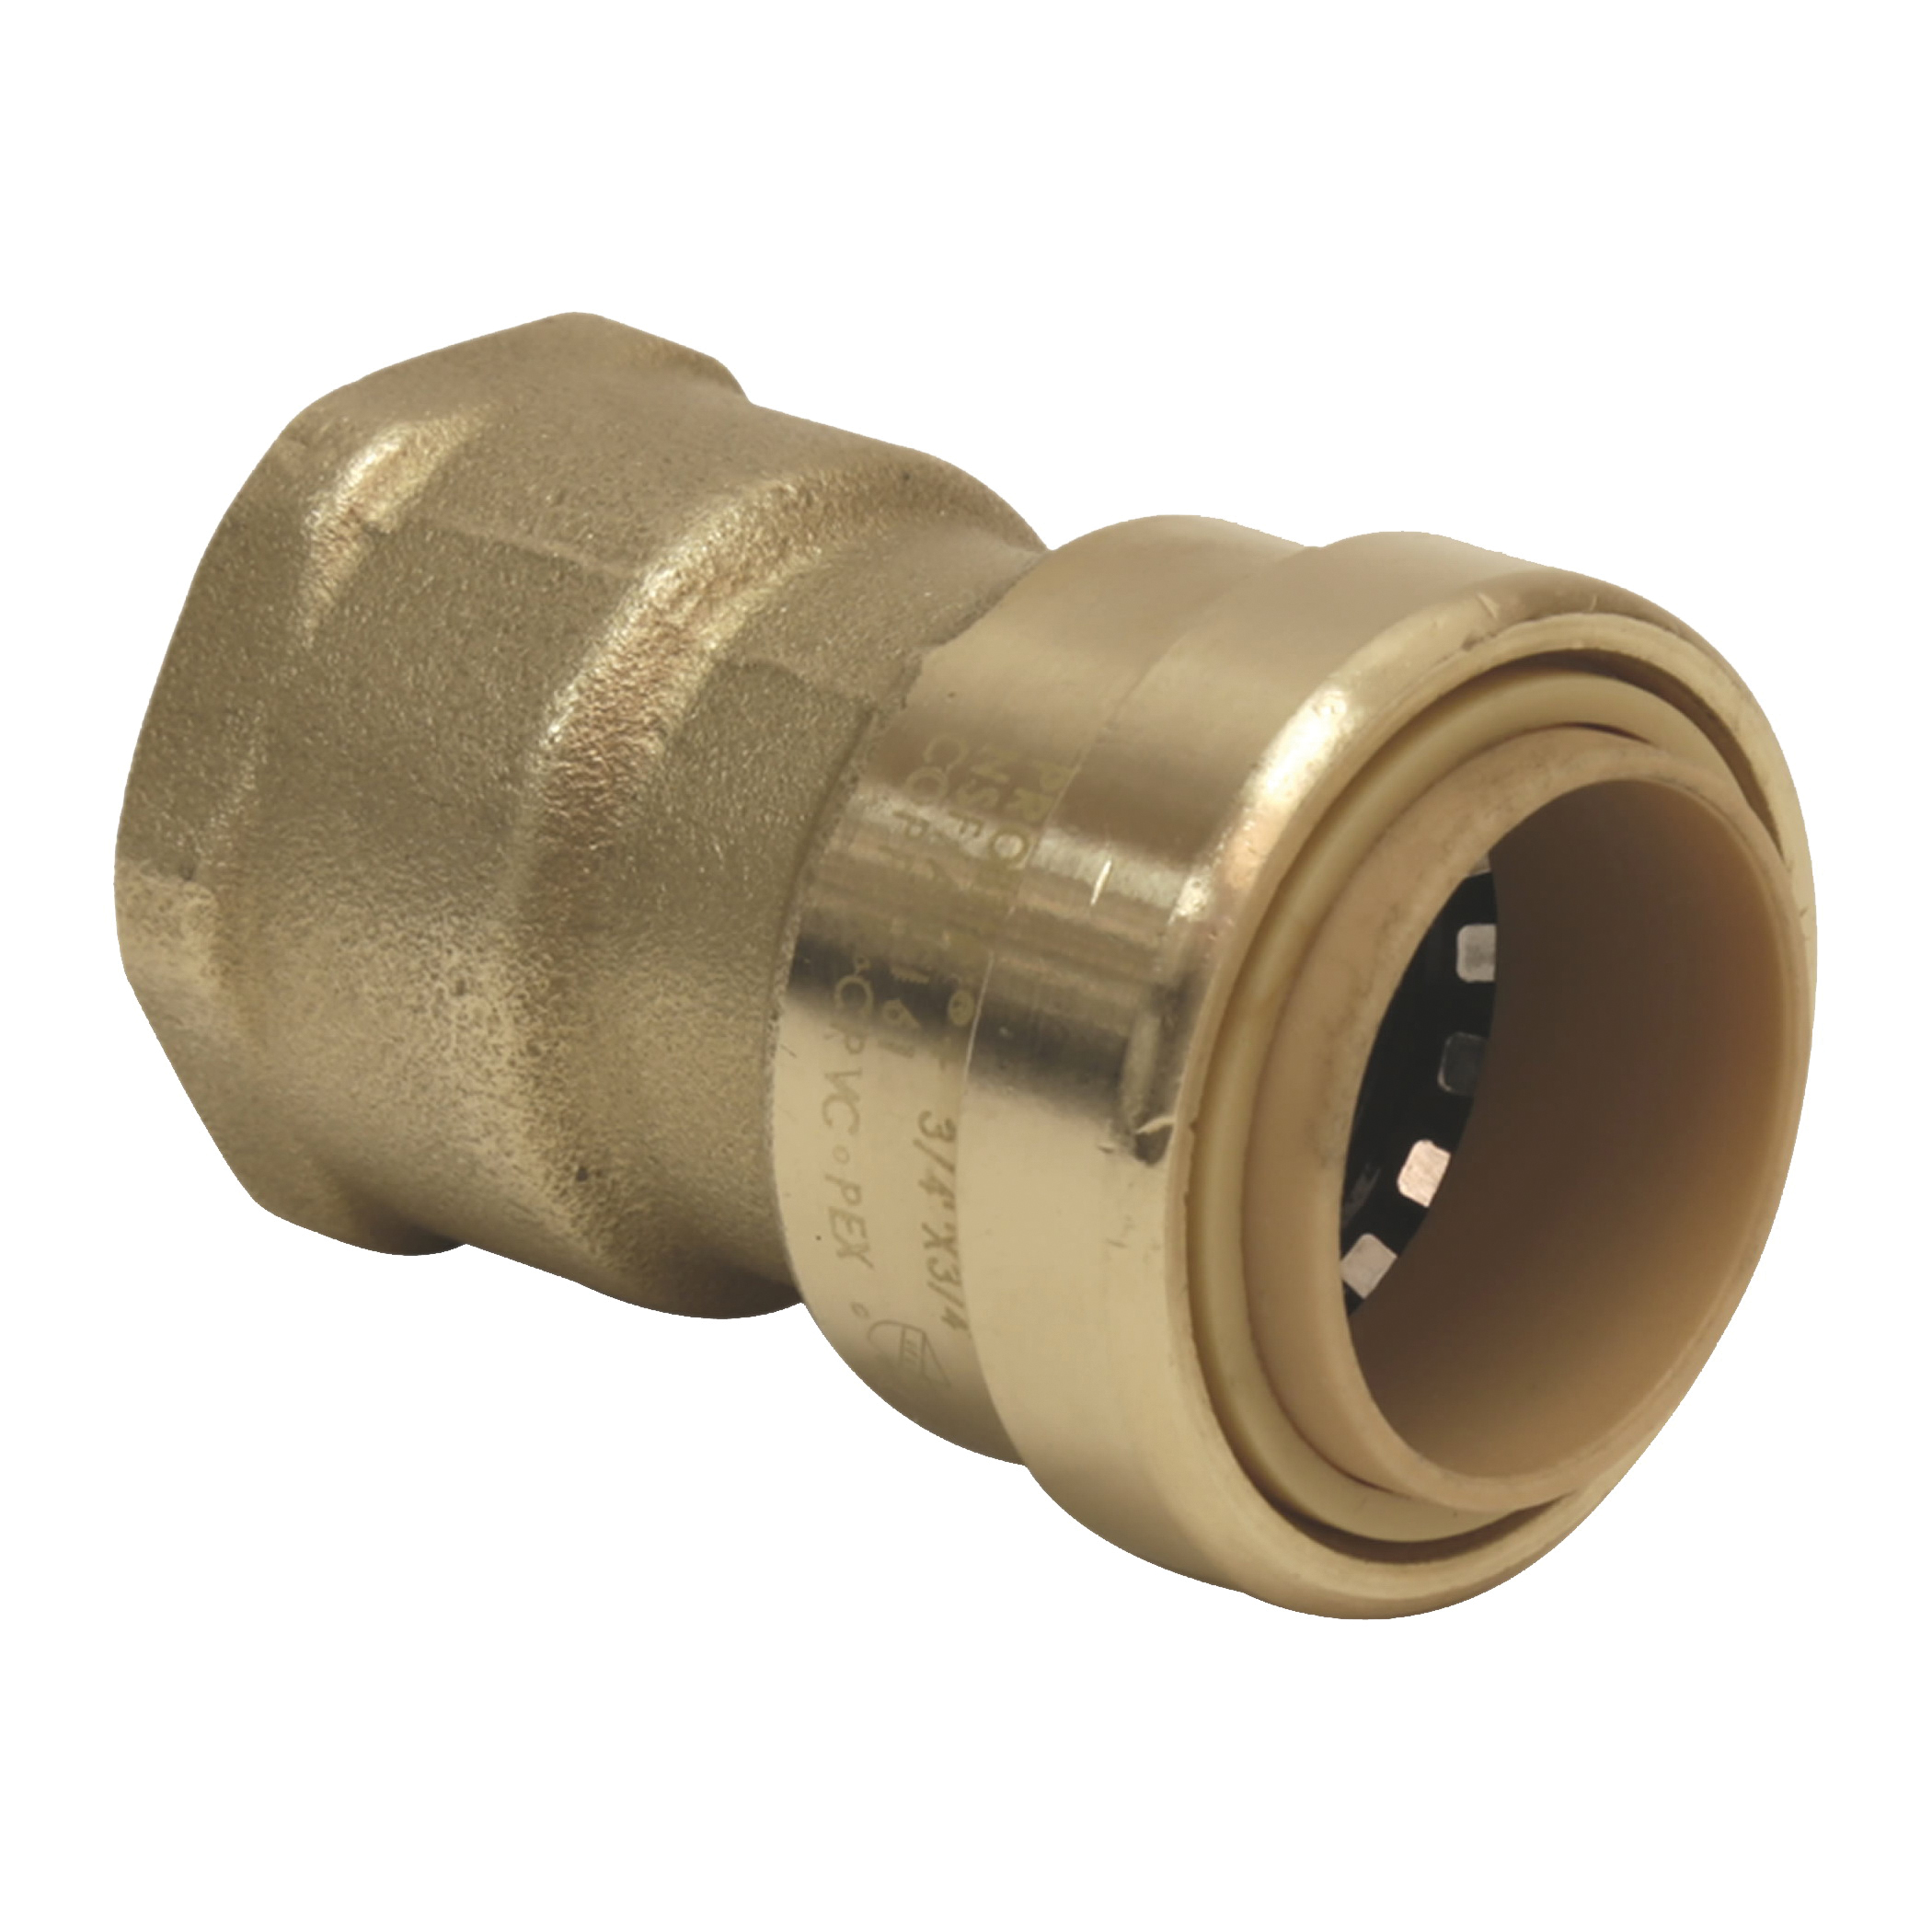 ProLine Series 630-203HC Adapter, 1/2 in, Push-Fit x FPT, Brass, 200 psi Pressure